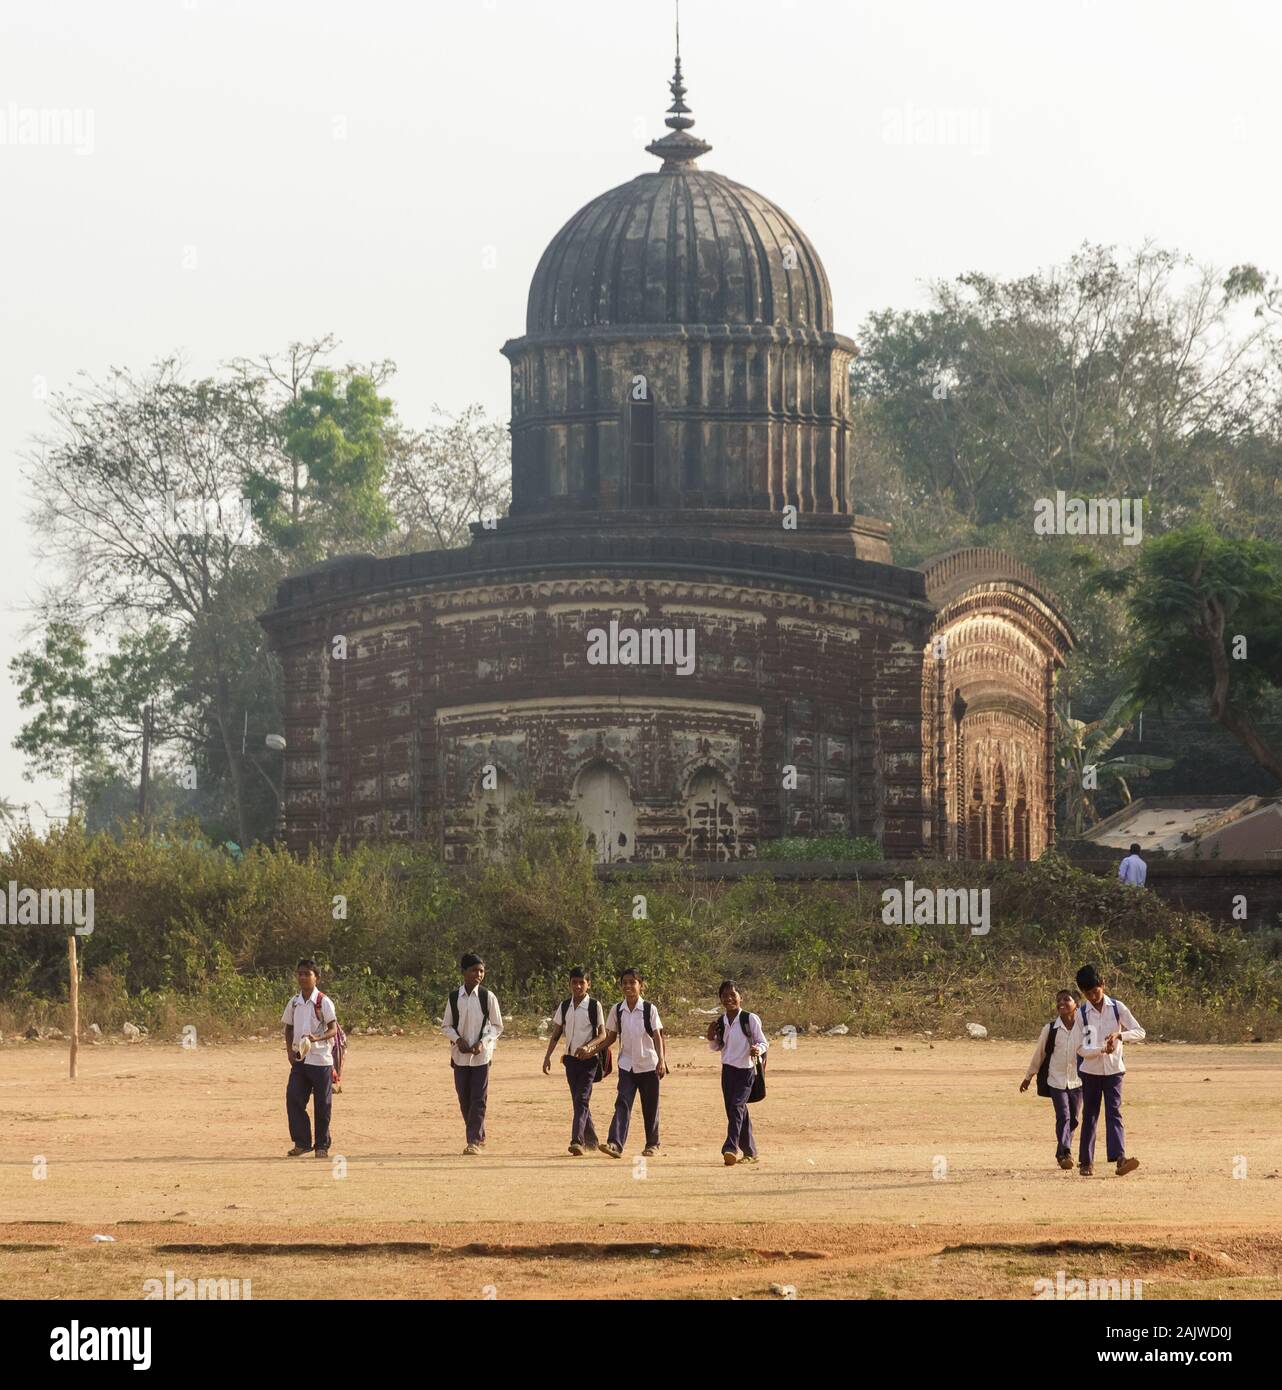 Bishnupur, West Bengal, India - February 6, 2018:  Kids walk back from school, the ancient Radha Shyam temple in the background. Stock Photo